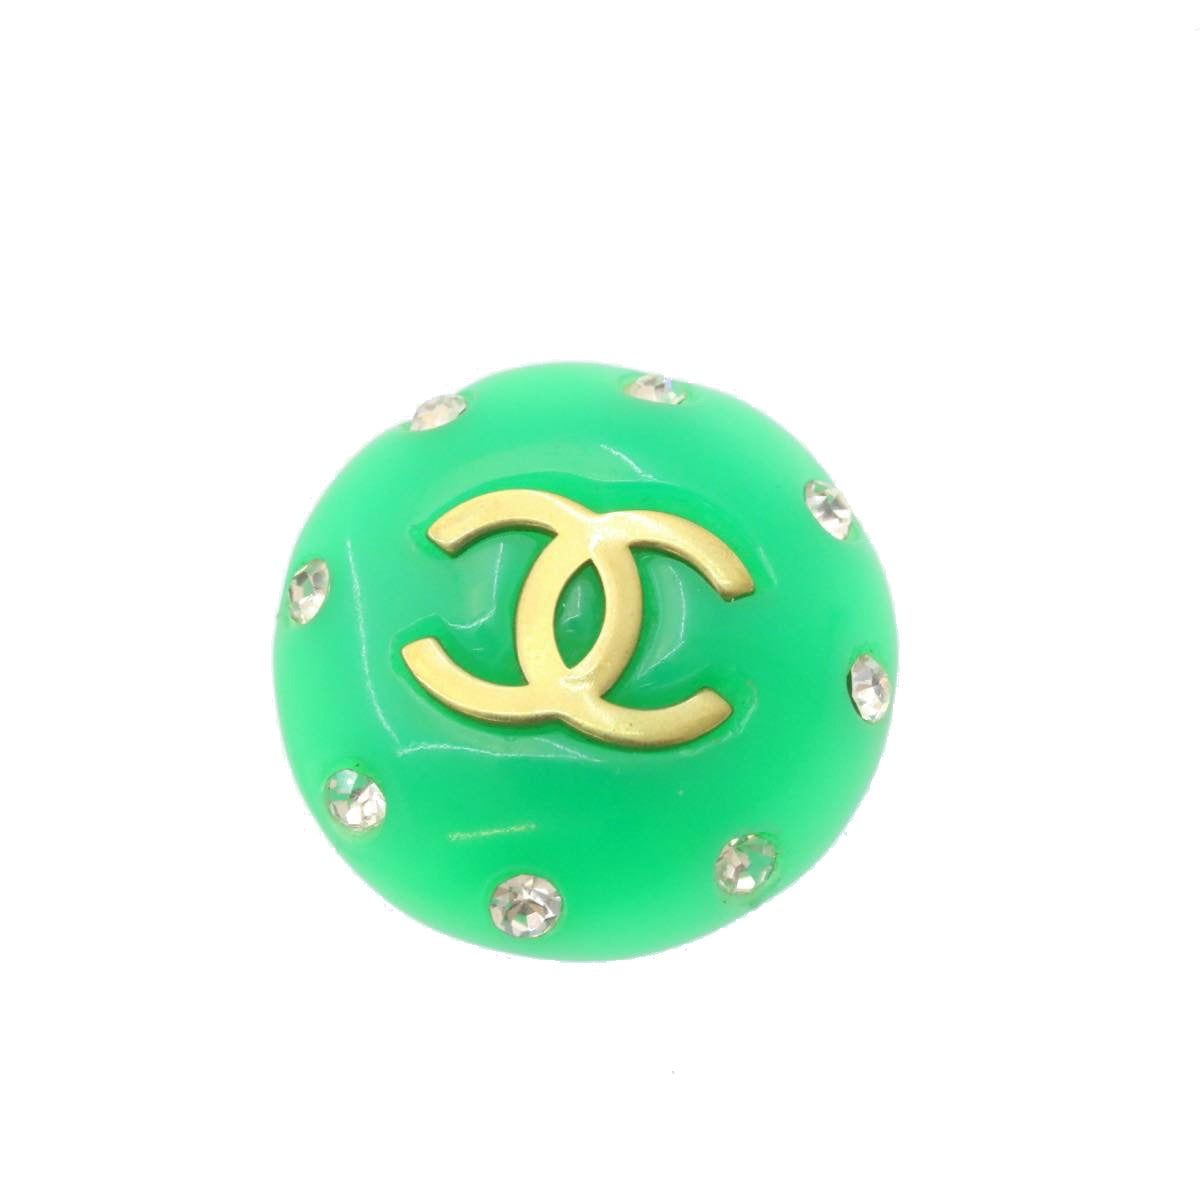 CHANEL Clip-on Earring Gold Tone Green CC Auth ar4783A